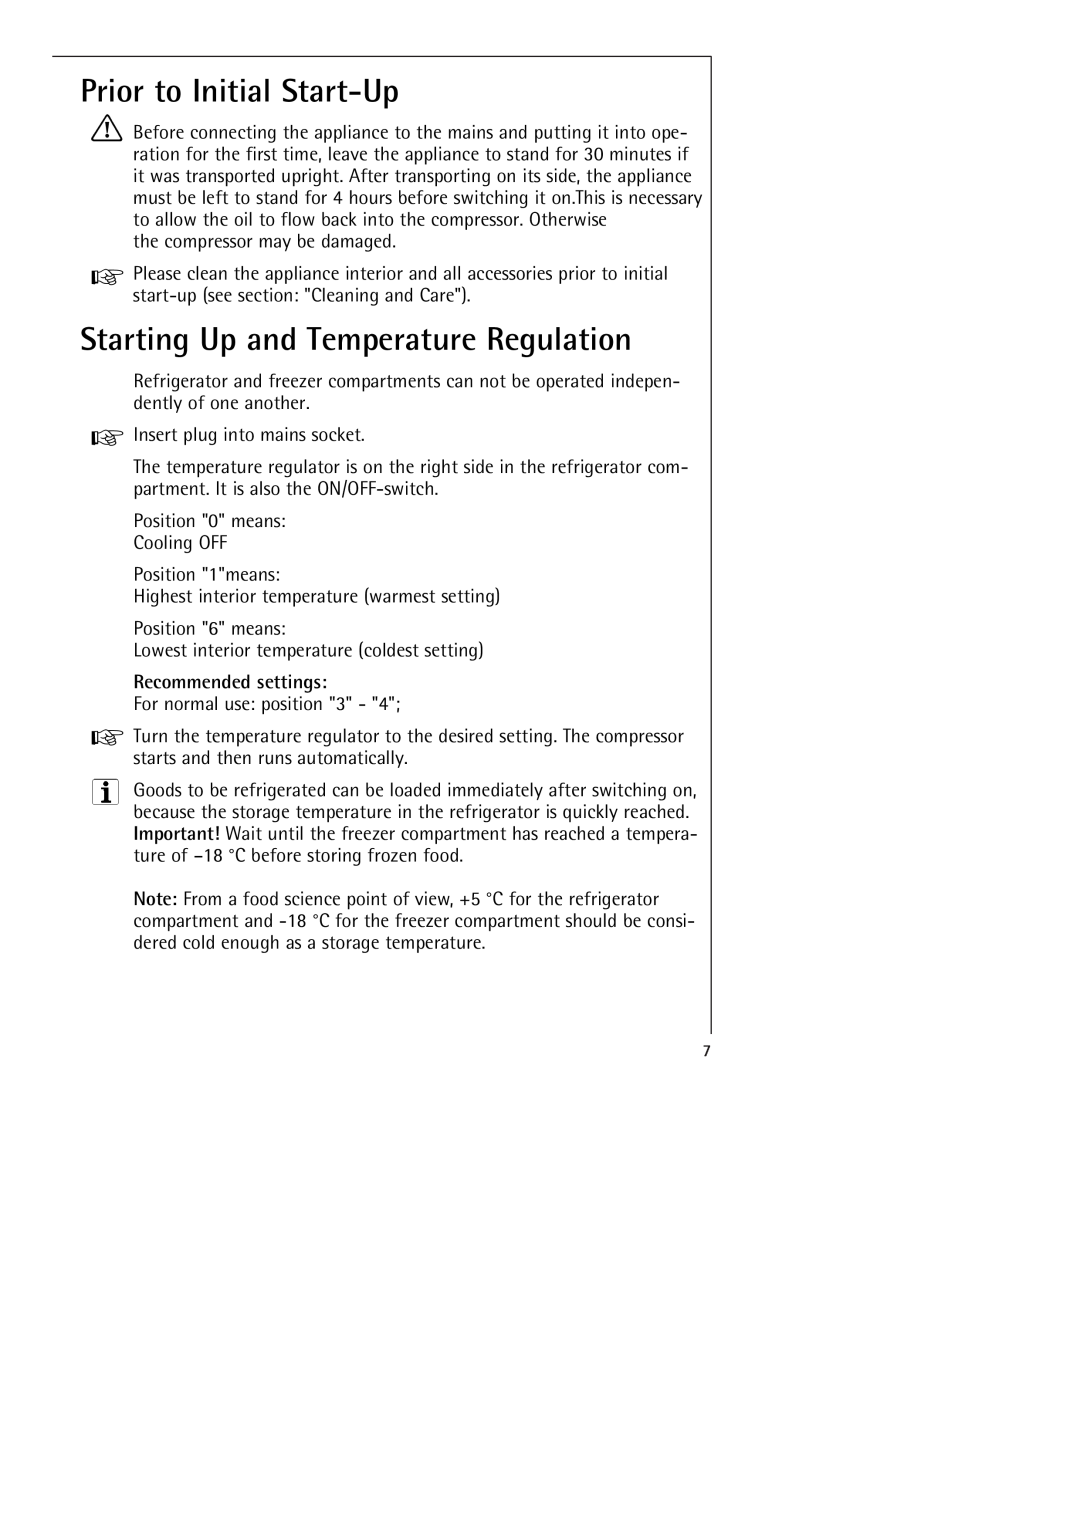 Electrolux SANTO 70398-DT manual Prior to Initial Start-Up, Starting Up and Temperature Regulation 